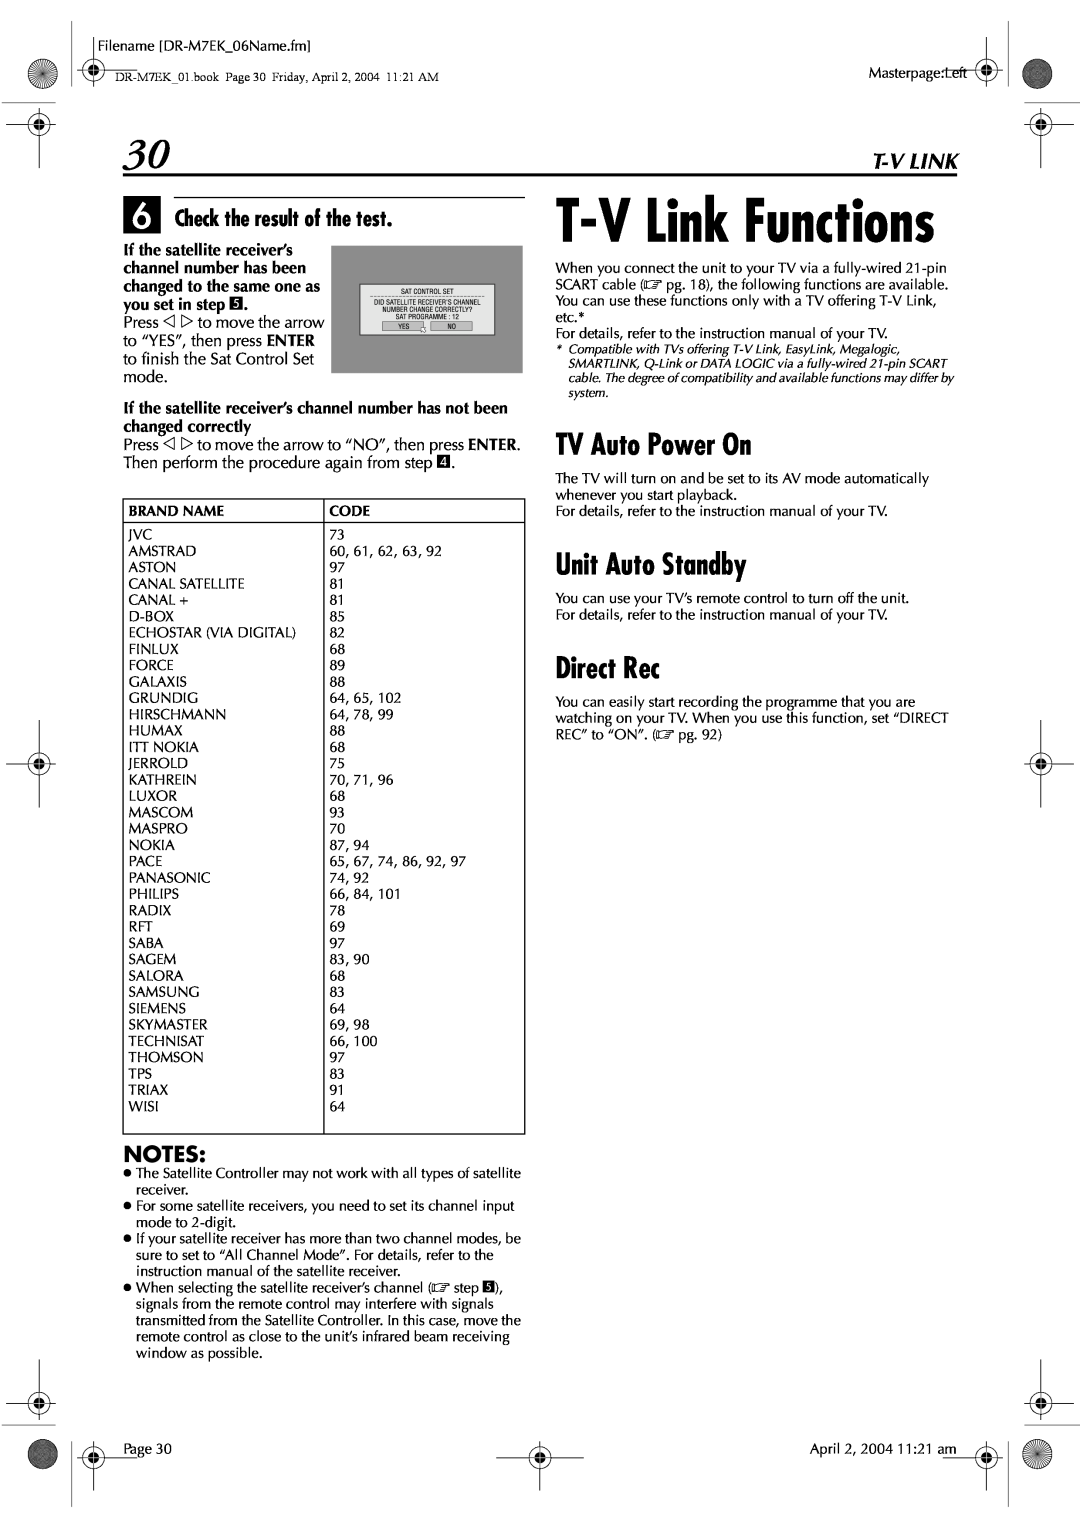 JVC DR-M7S manual T-V Link Functions, TV Auto Power On, Unit Auto Standby, Direct Rec, F Check the result of the test 